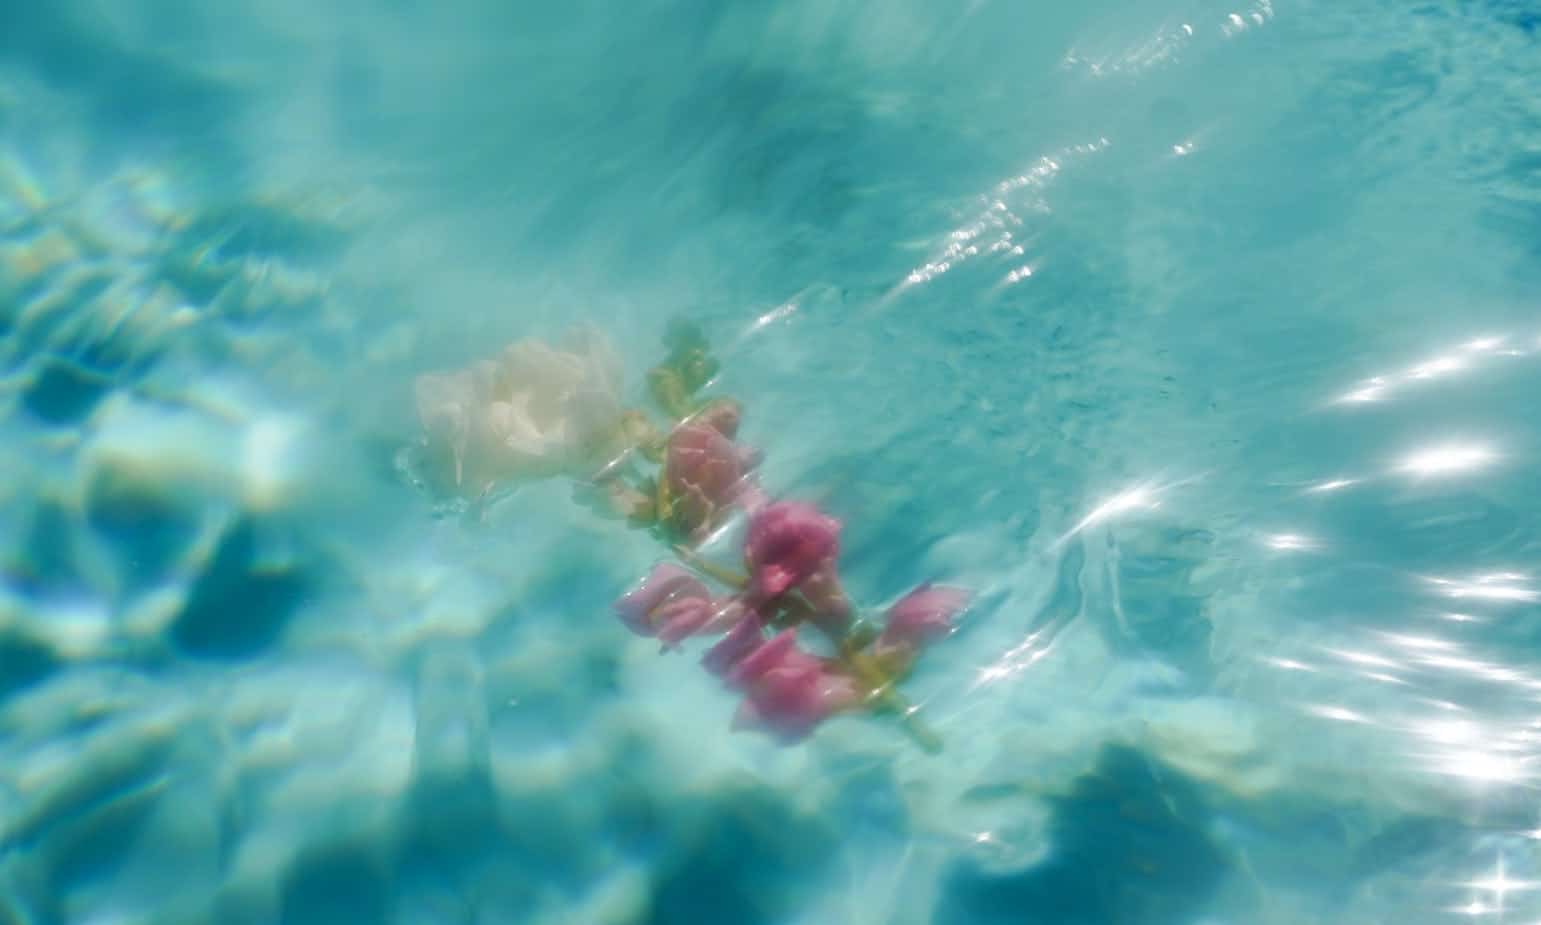 Rose floating in a pool